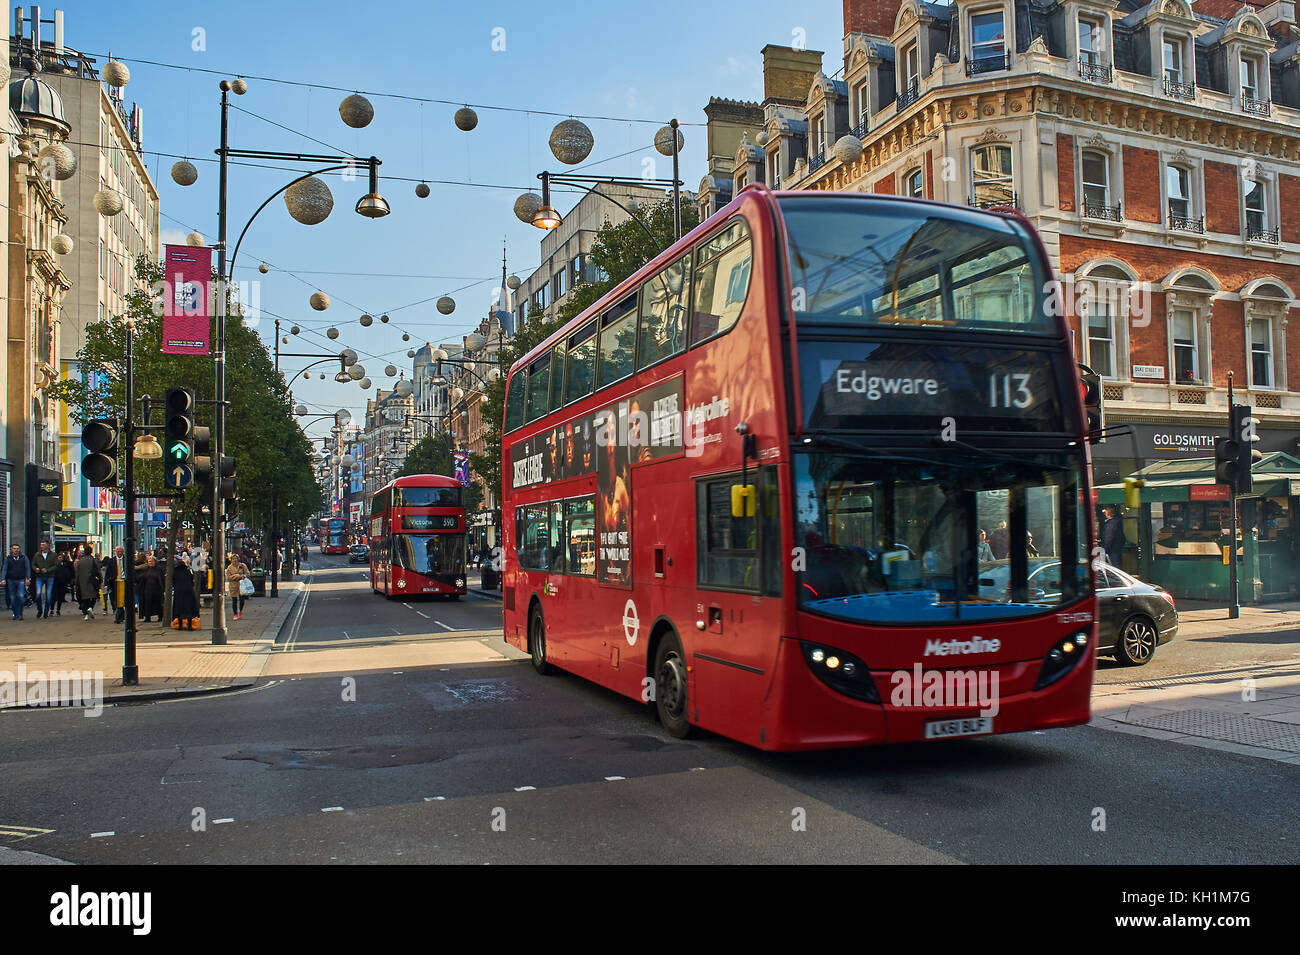 A red double decker bus in London's West End travels down Oxford Street. London buses are a great way to travel around the city. Stock Photo